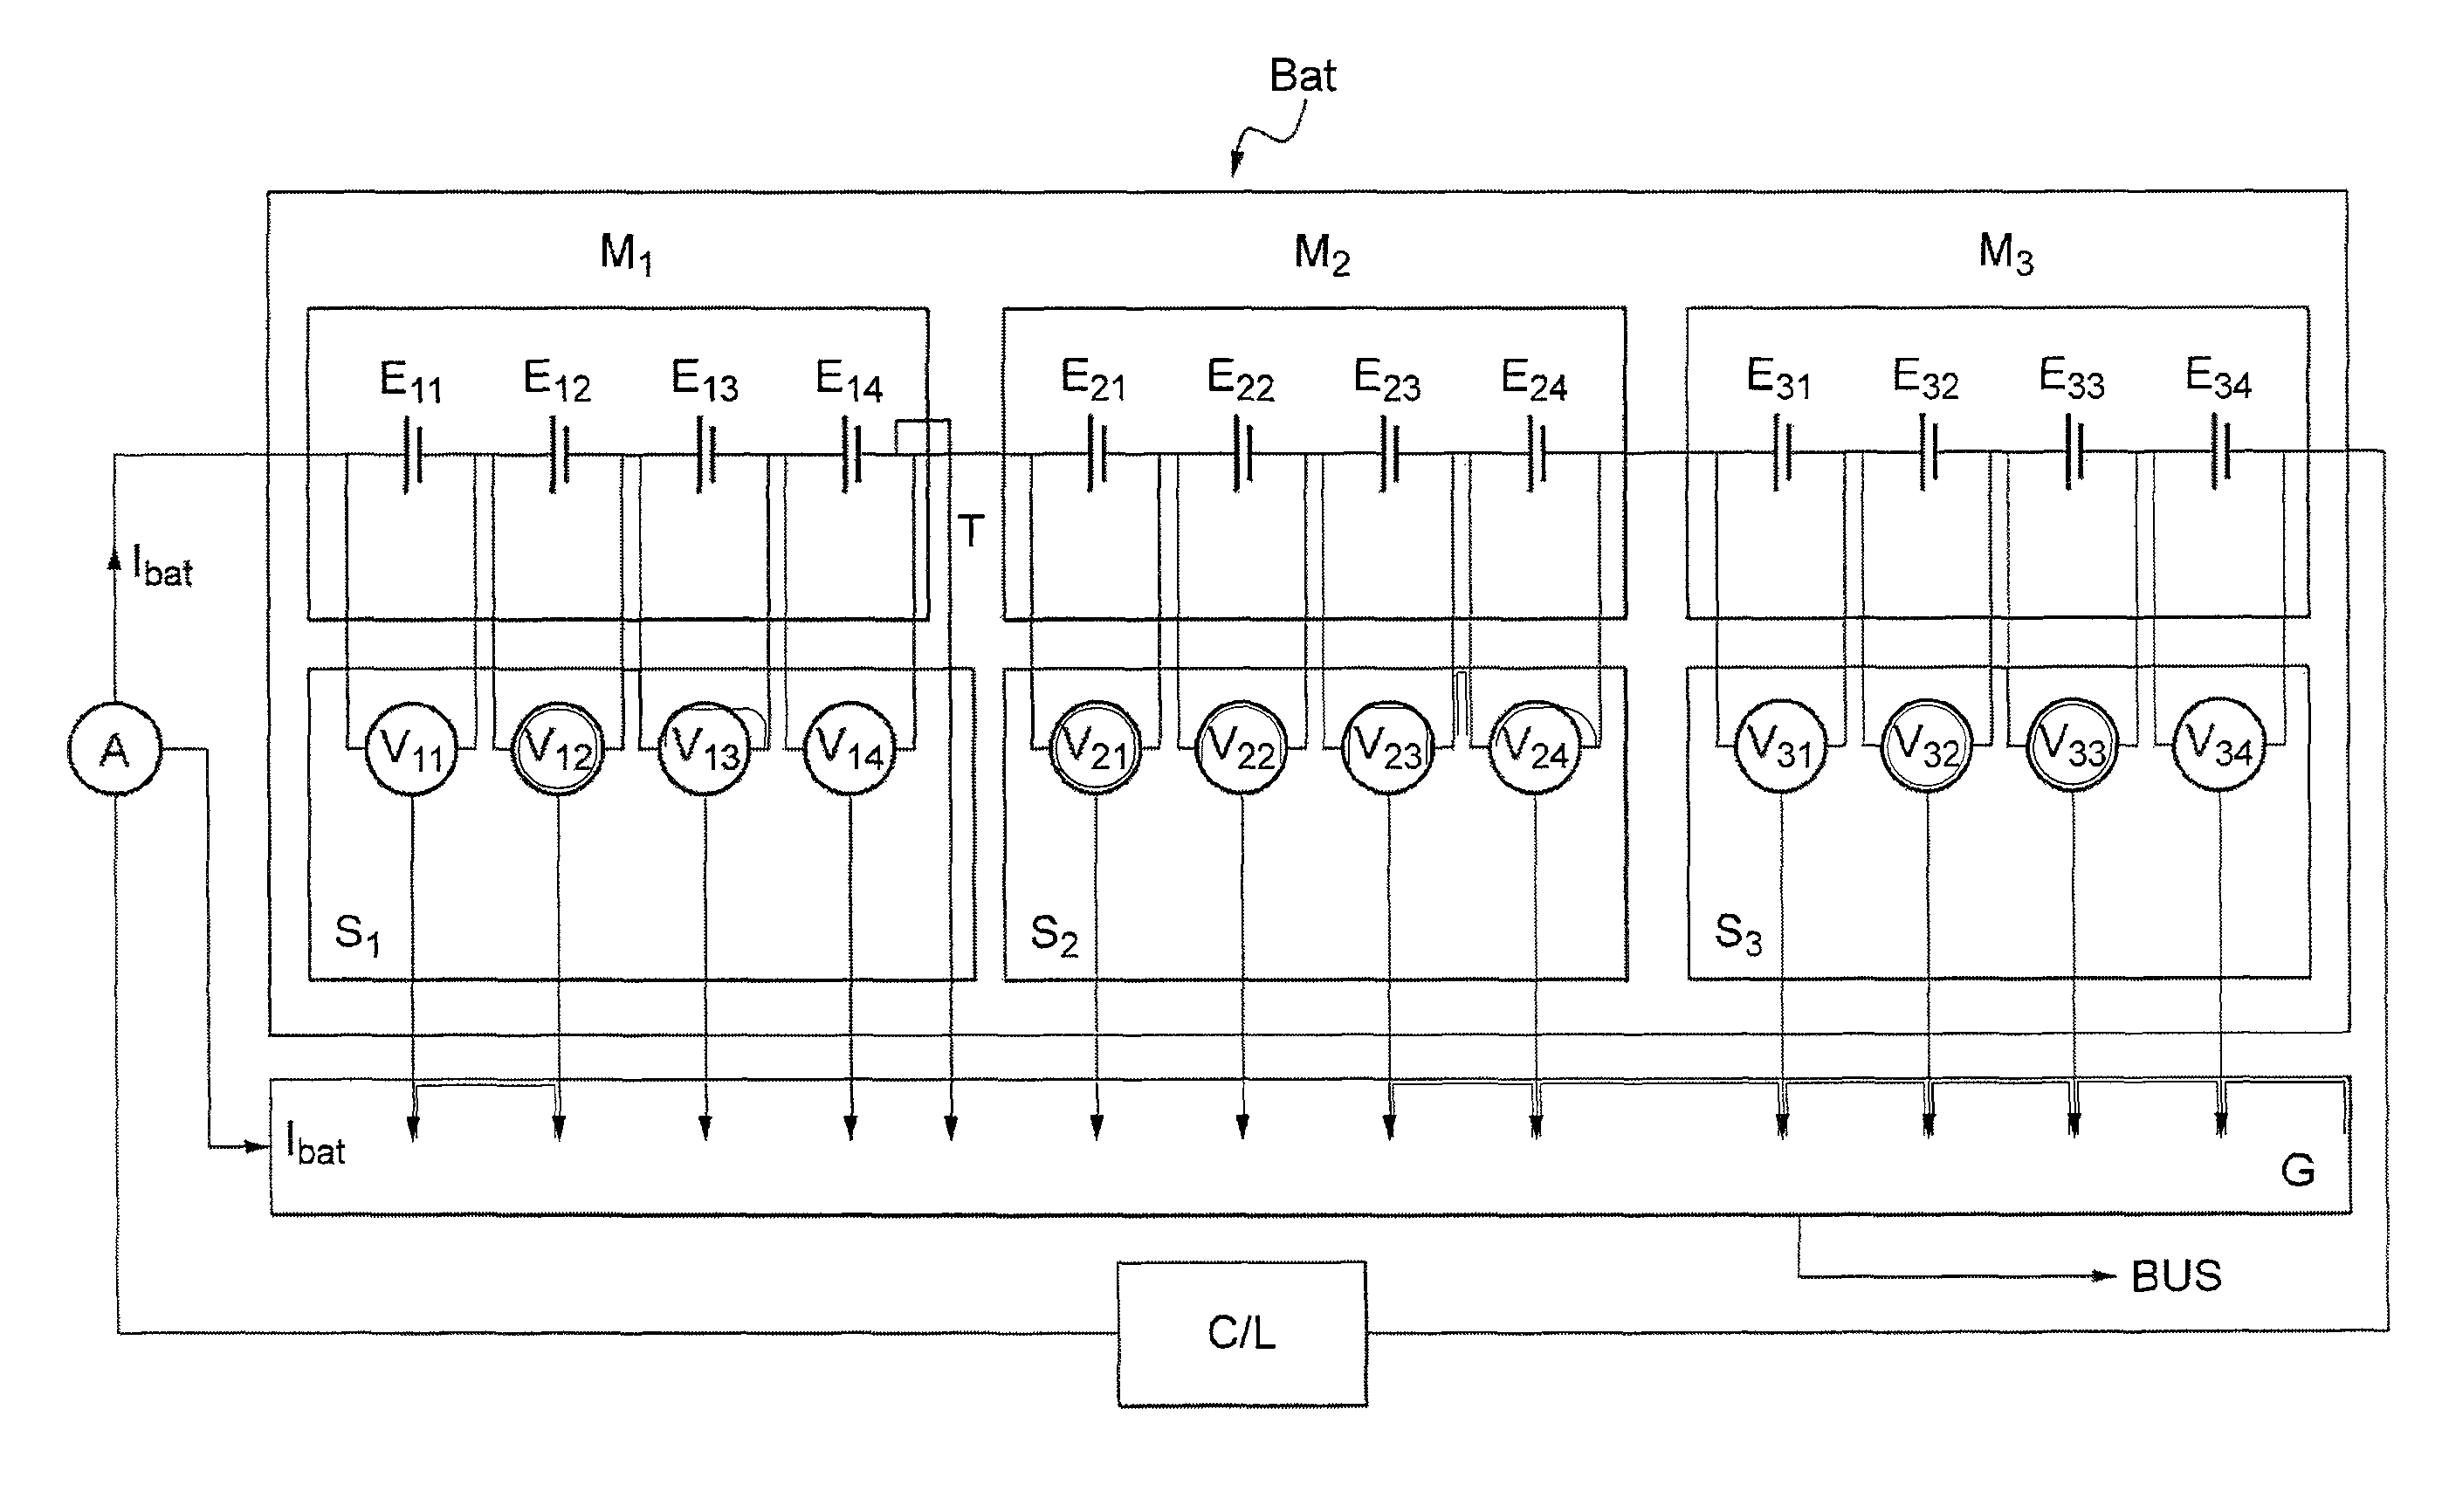 Method and system for estimating state of charge of a lithium electrochemical cell having a lithium phosphate type positive electrode